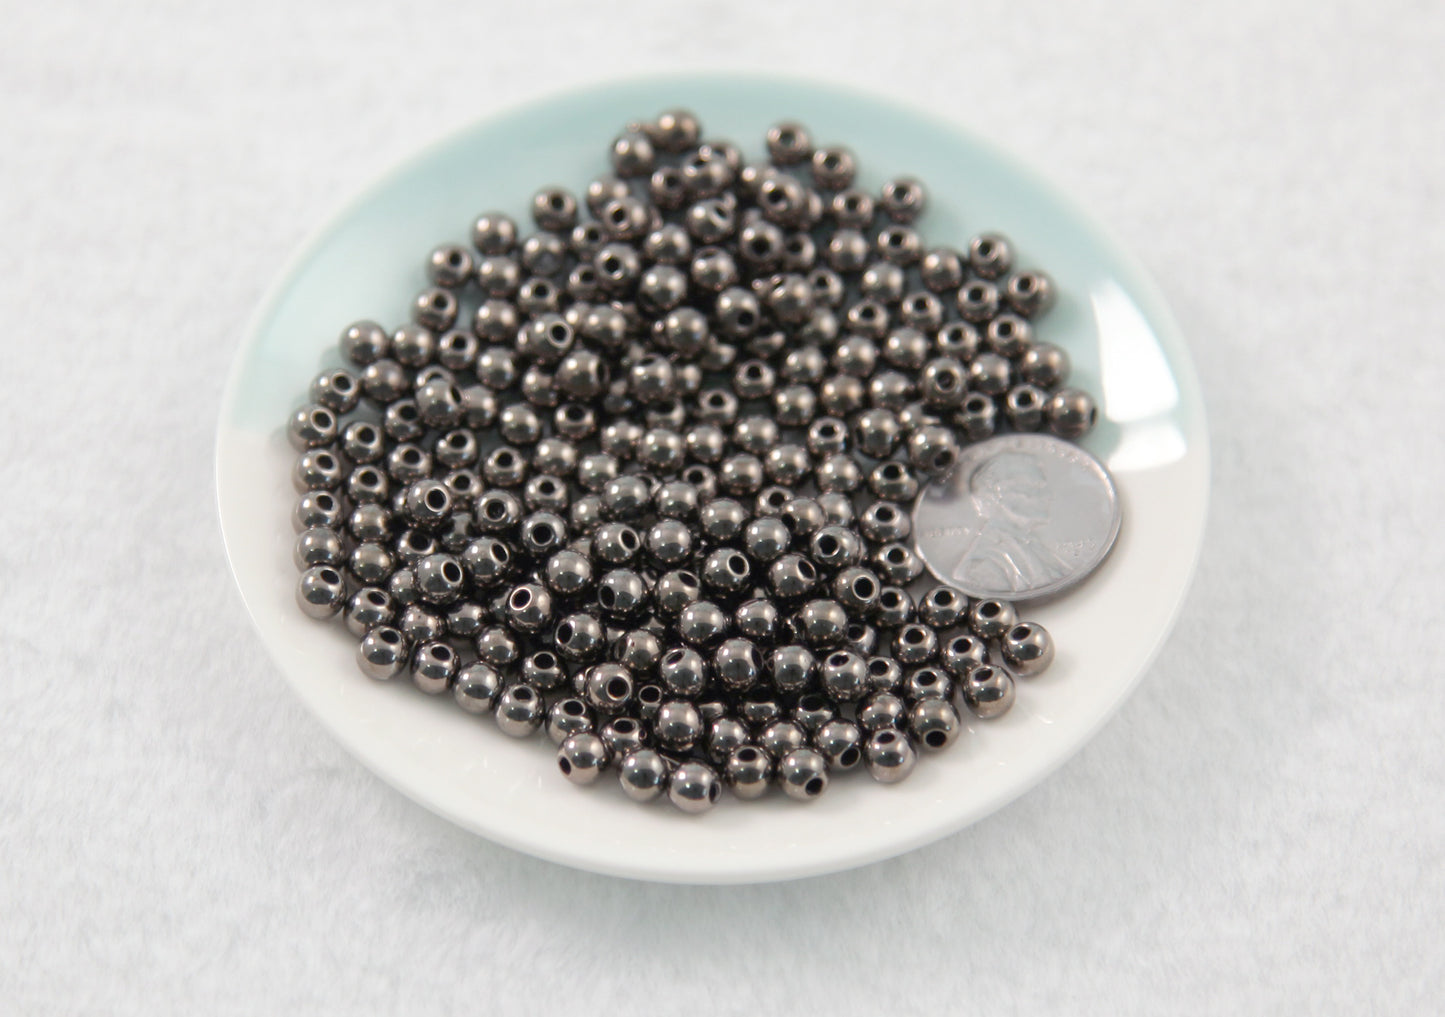 Spacer Beads - 300 pcs - 5mm Electroplated Gunmetal Dark Silver Plastic Spacer Beads - Super Lightweight - Easy to use in jewelry